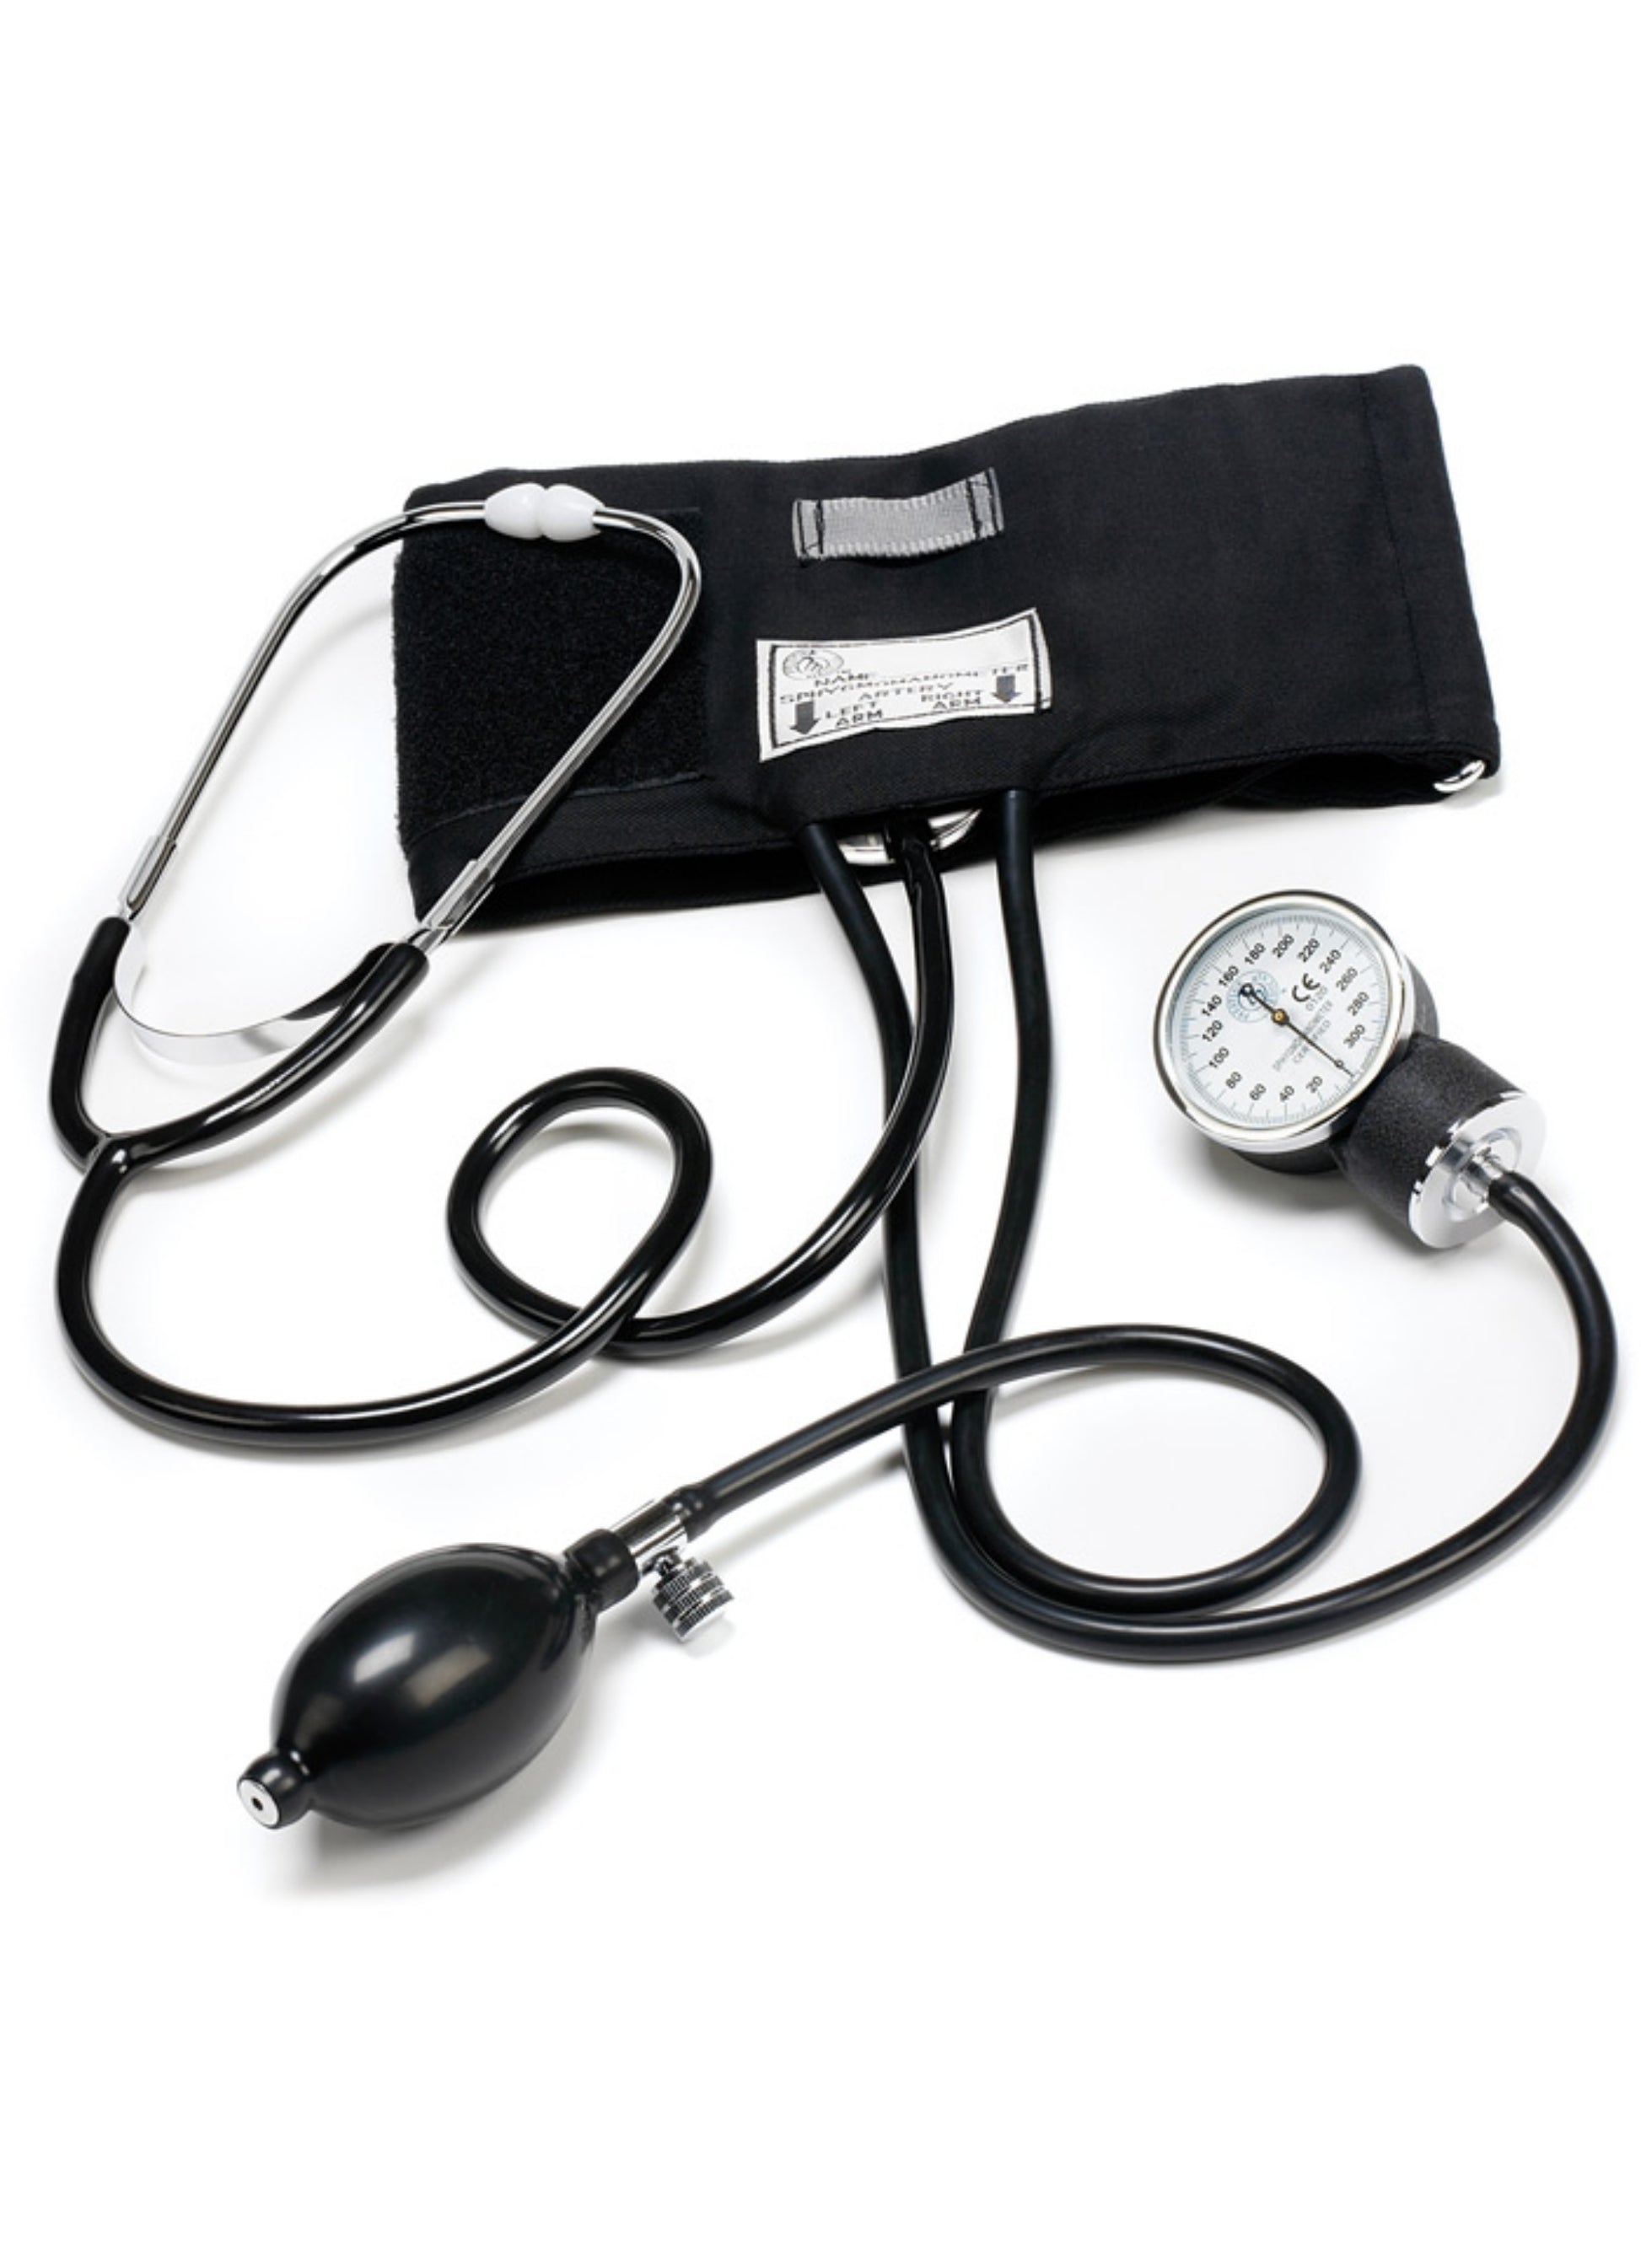 Traditional Home Blood Pressure Set(Large Adult Cuff) – My